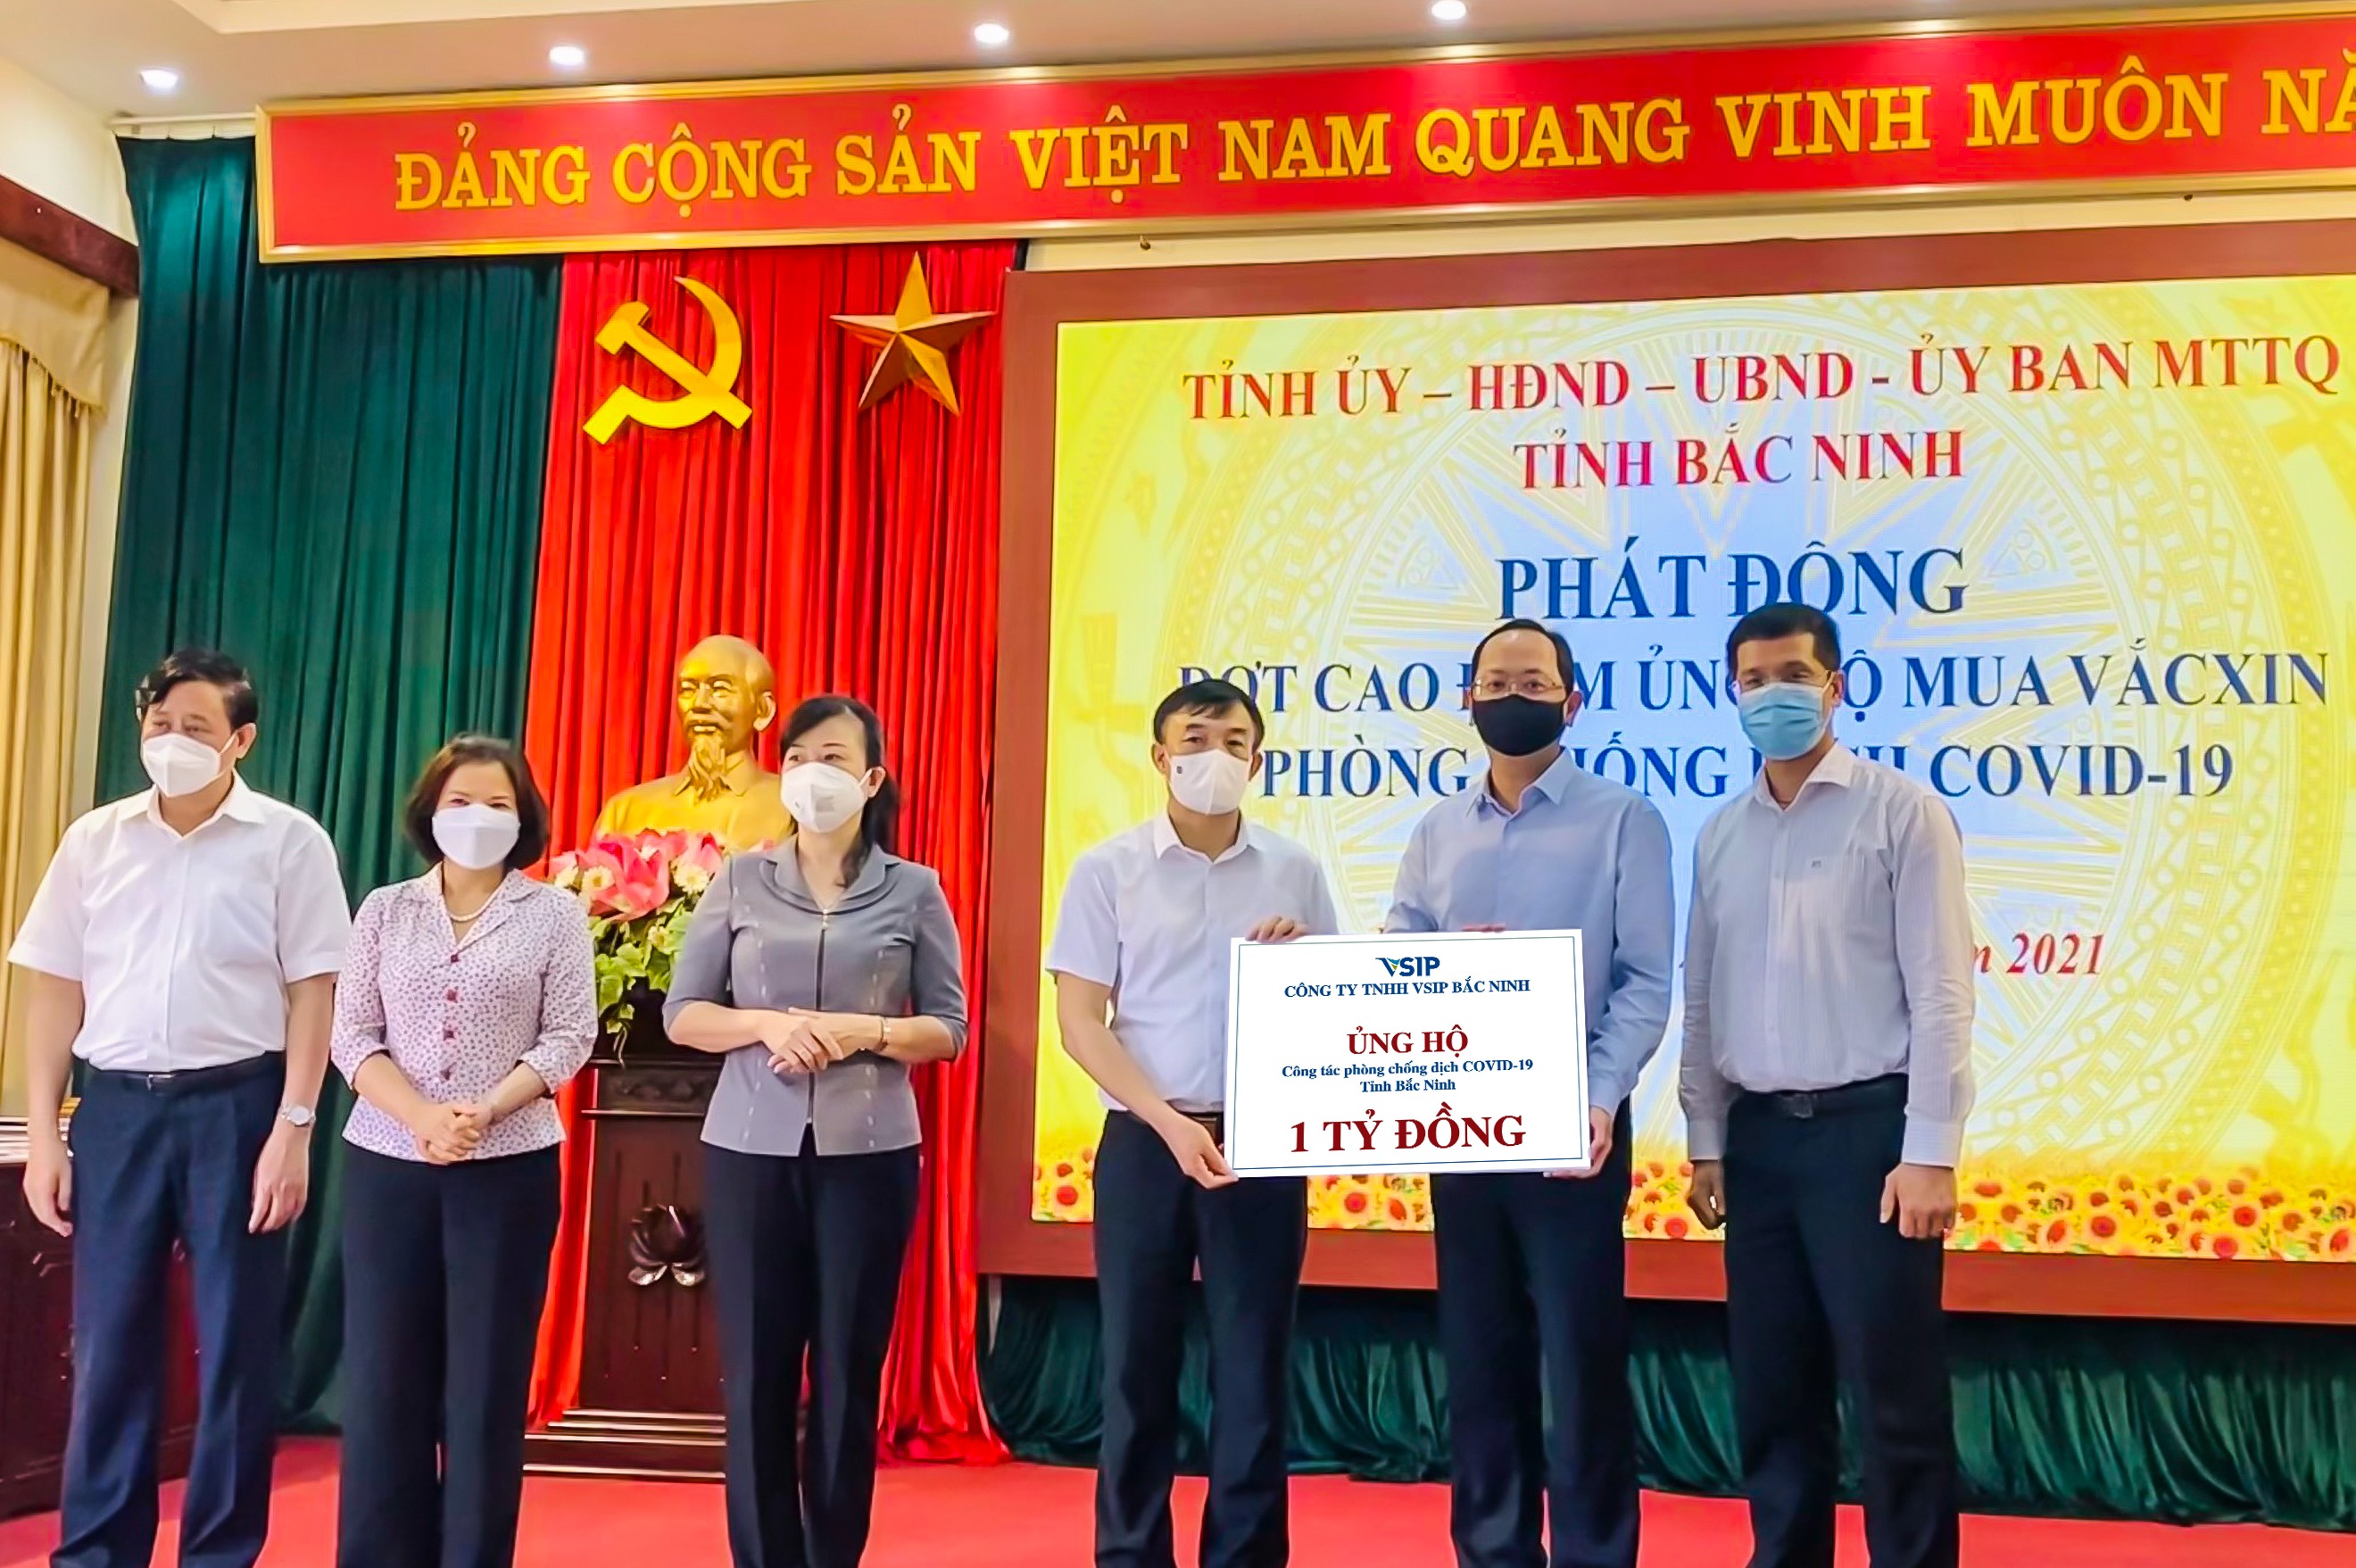 VSIP BAC NINH’S CONTINUED SUPPORT TO THE BAC NINH PROVINCE AMIDST THE COVID PANDEMIC